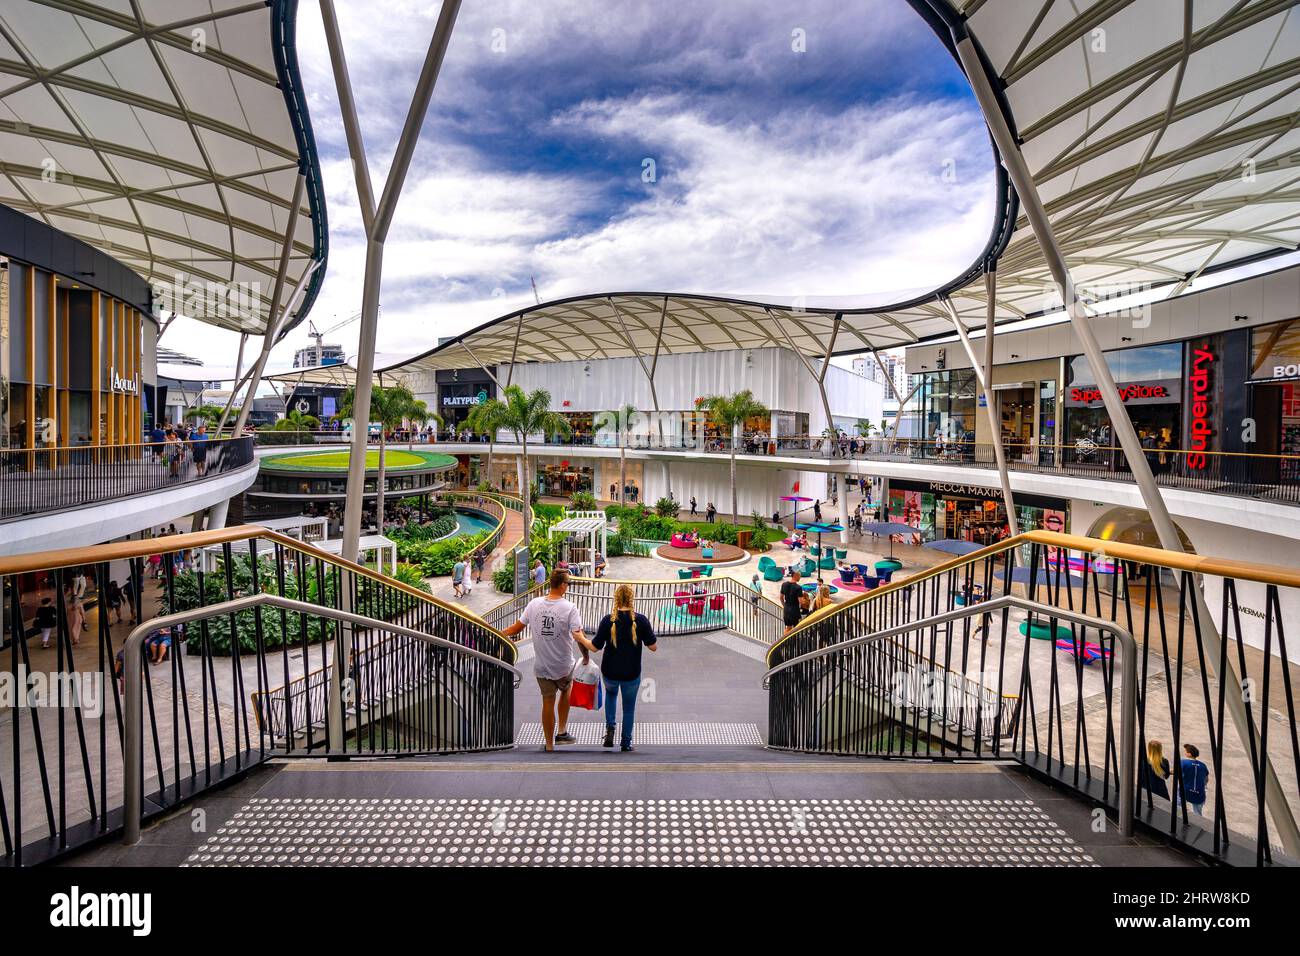 Pacific Fair named retail property of the year - Inside Retail Australia